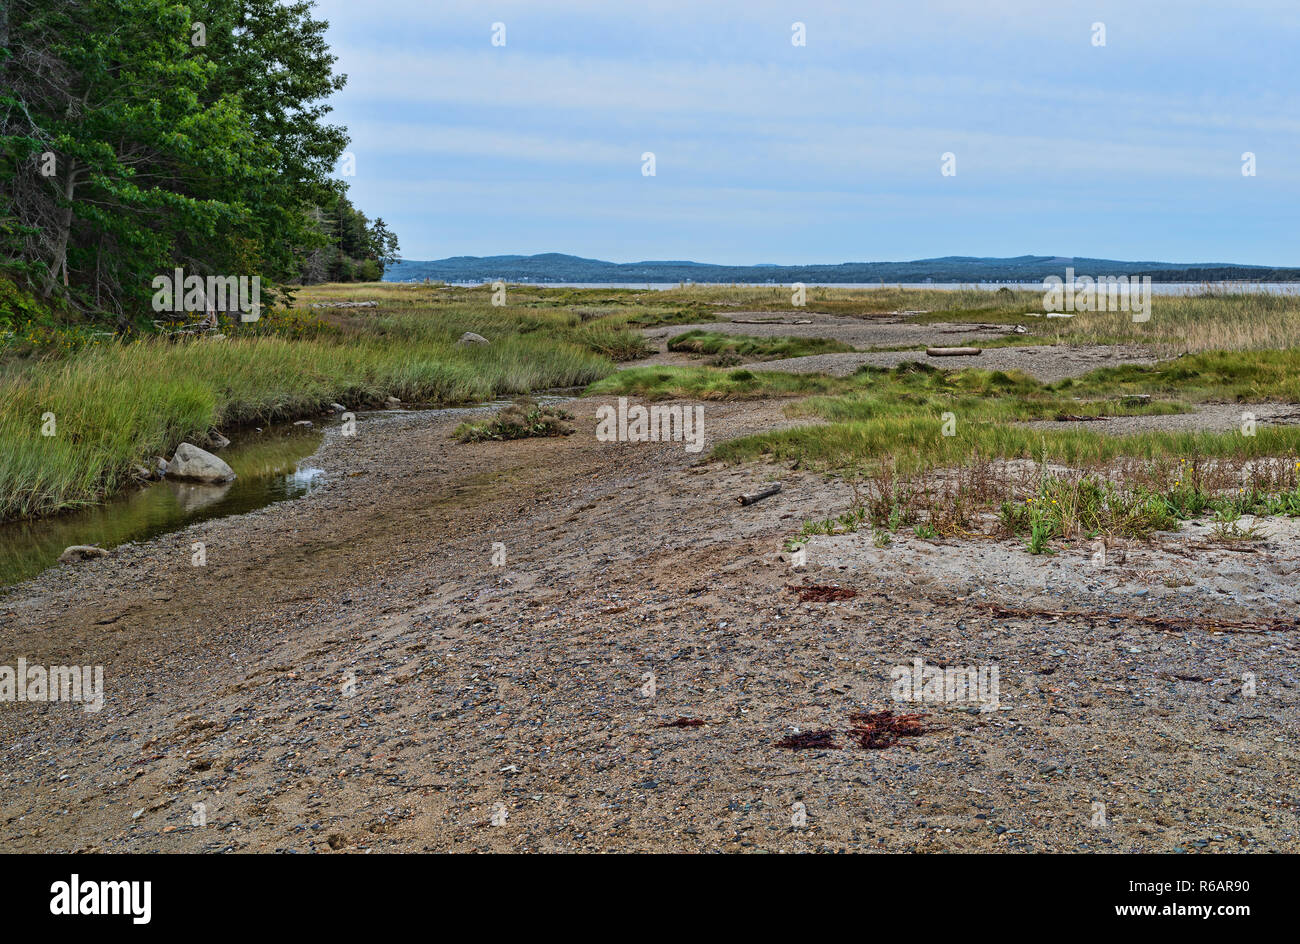 Beach and stream in a tidal zone at Sears Island at Searsport, Maine on an overcast summer day. Stock Photo